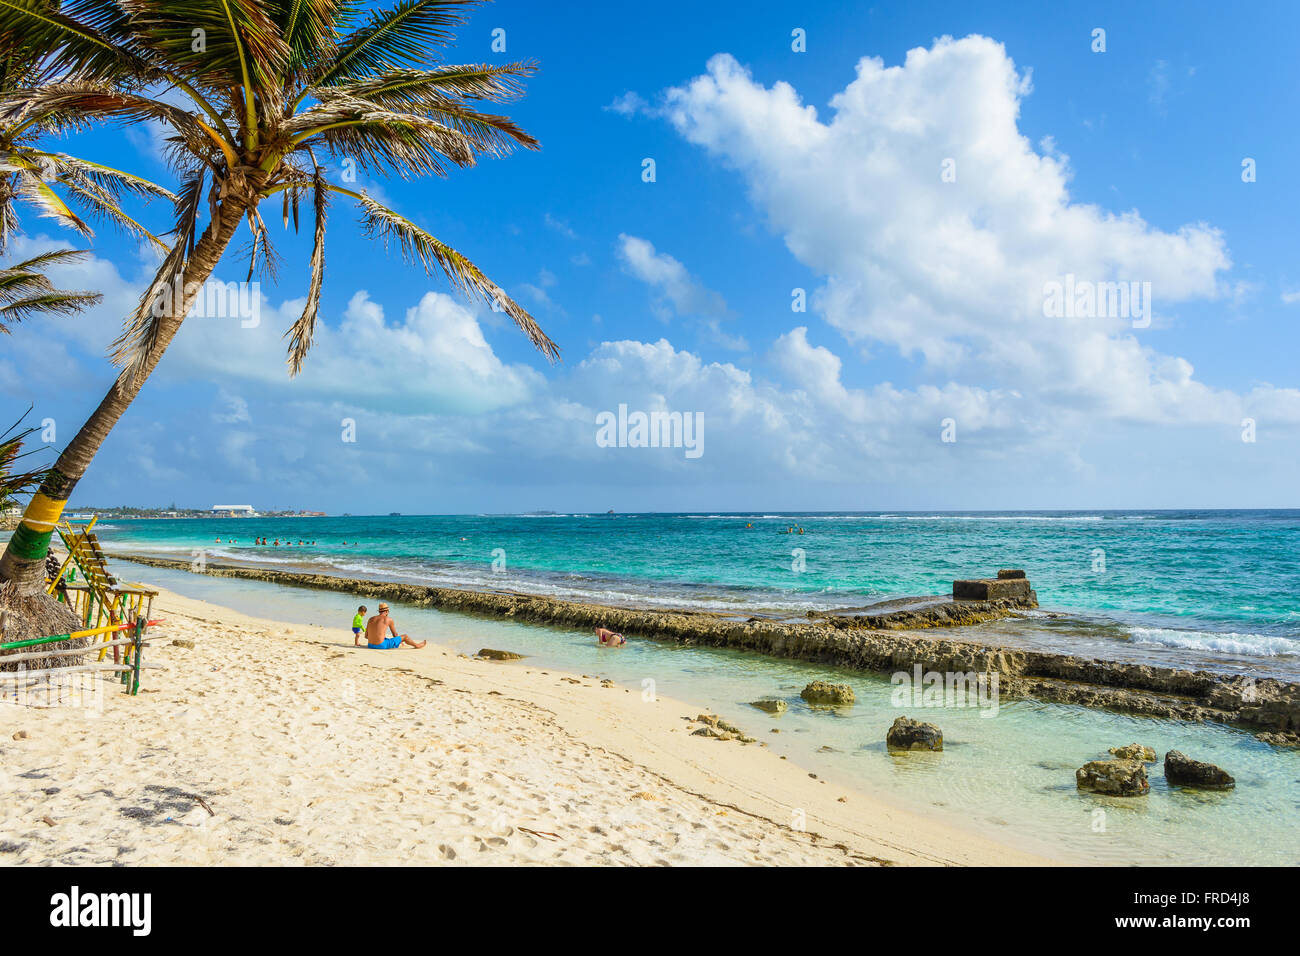 Palm tree in a sunny day at the beach in the island of San Andrés, Colombia, Stock Photo